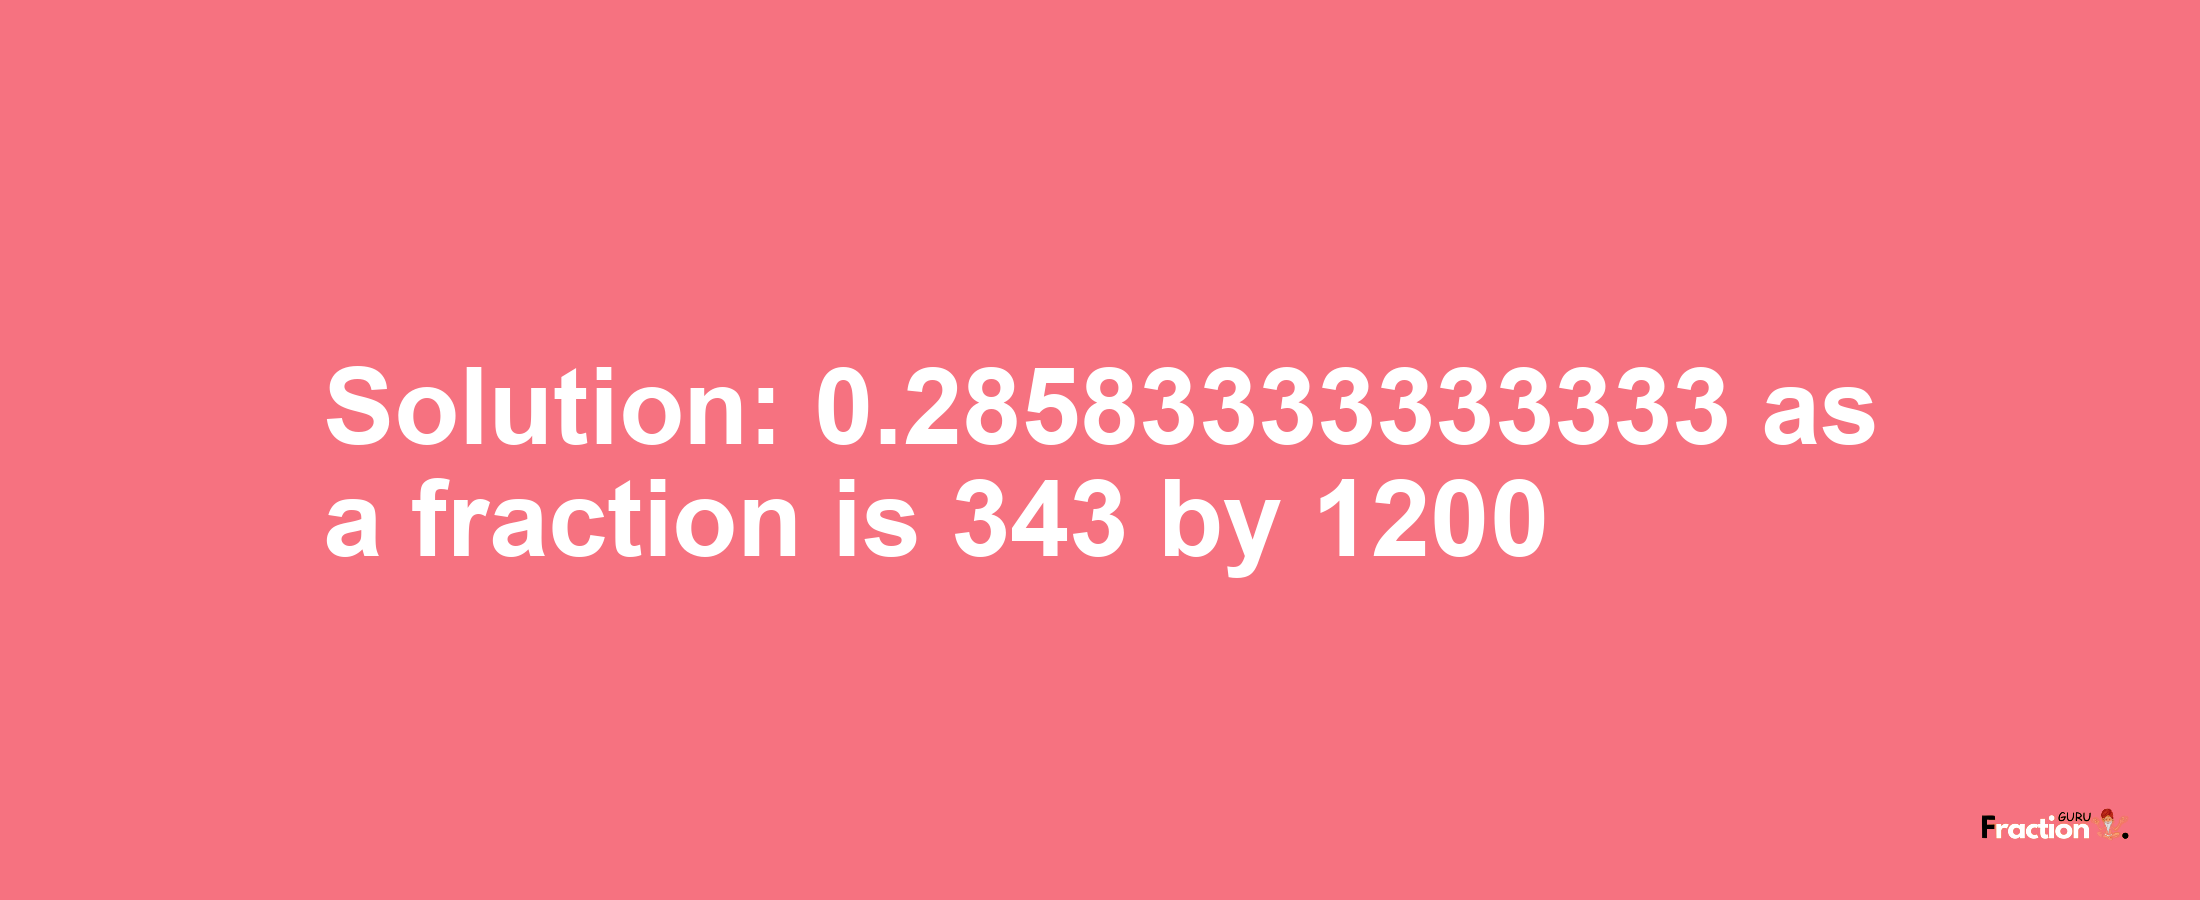 Solution:0.28583333333333 as a fraction is 343/1200